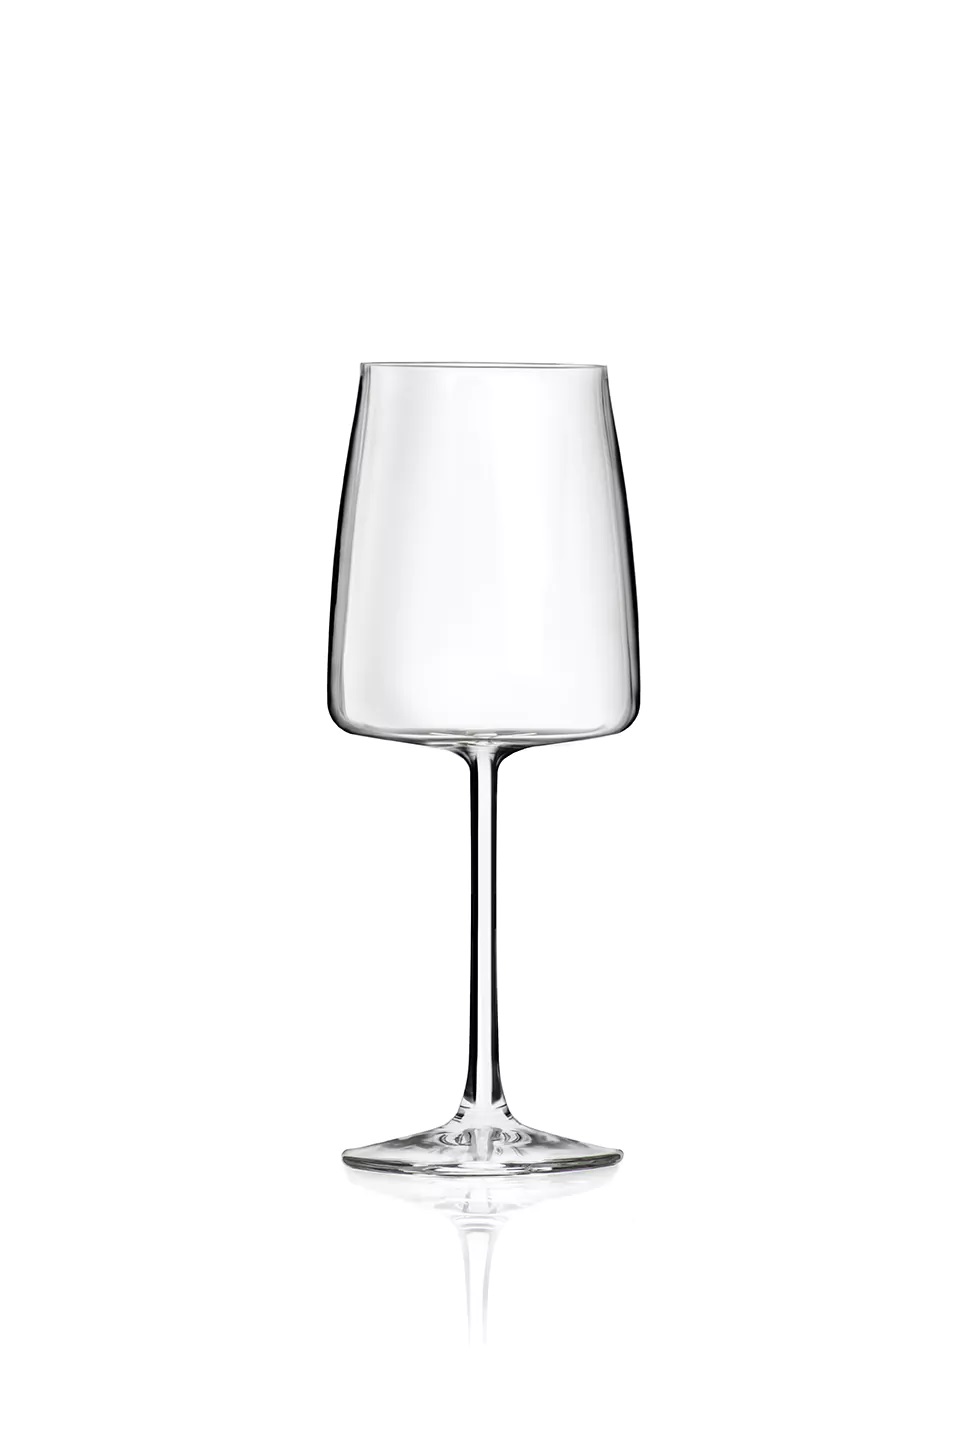 ESSENTIAL WINE GLASS 54cl LUXION PROFESSIONAL RCR ITALY